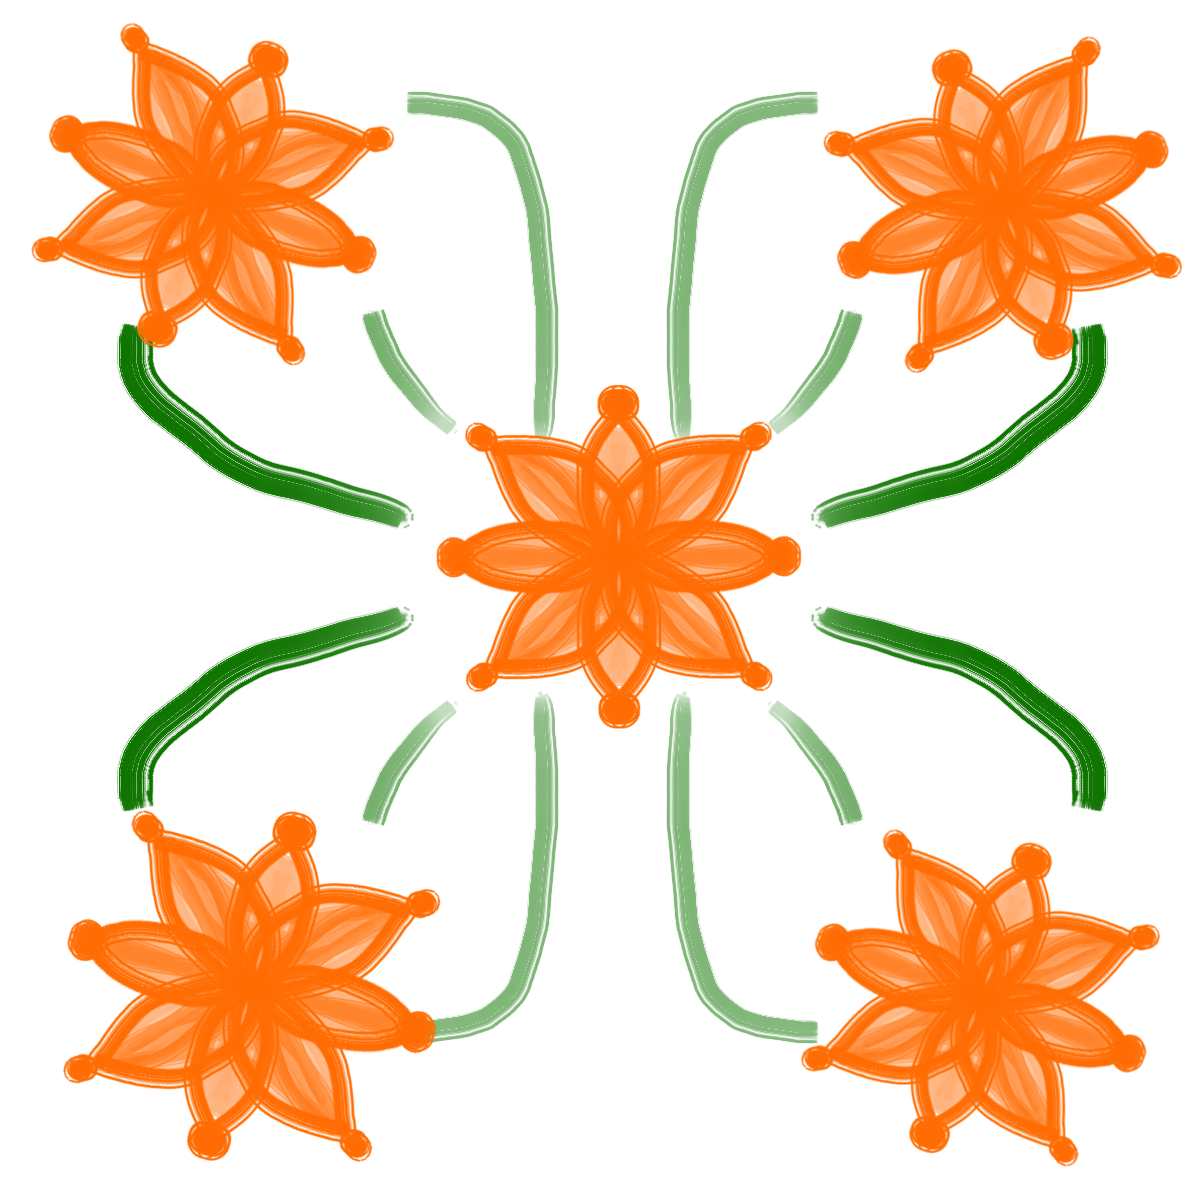 A drawn picture of orange flowers with green stems.